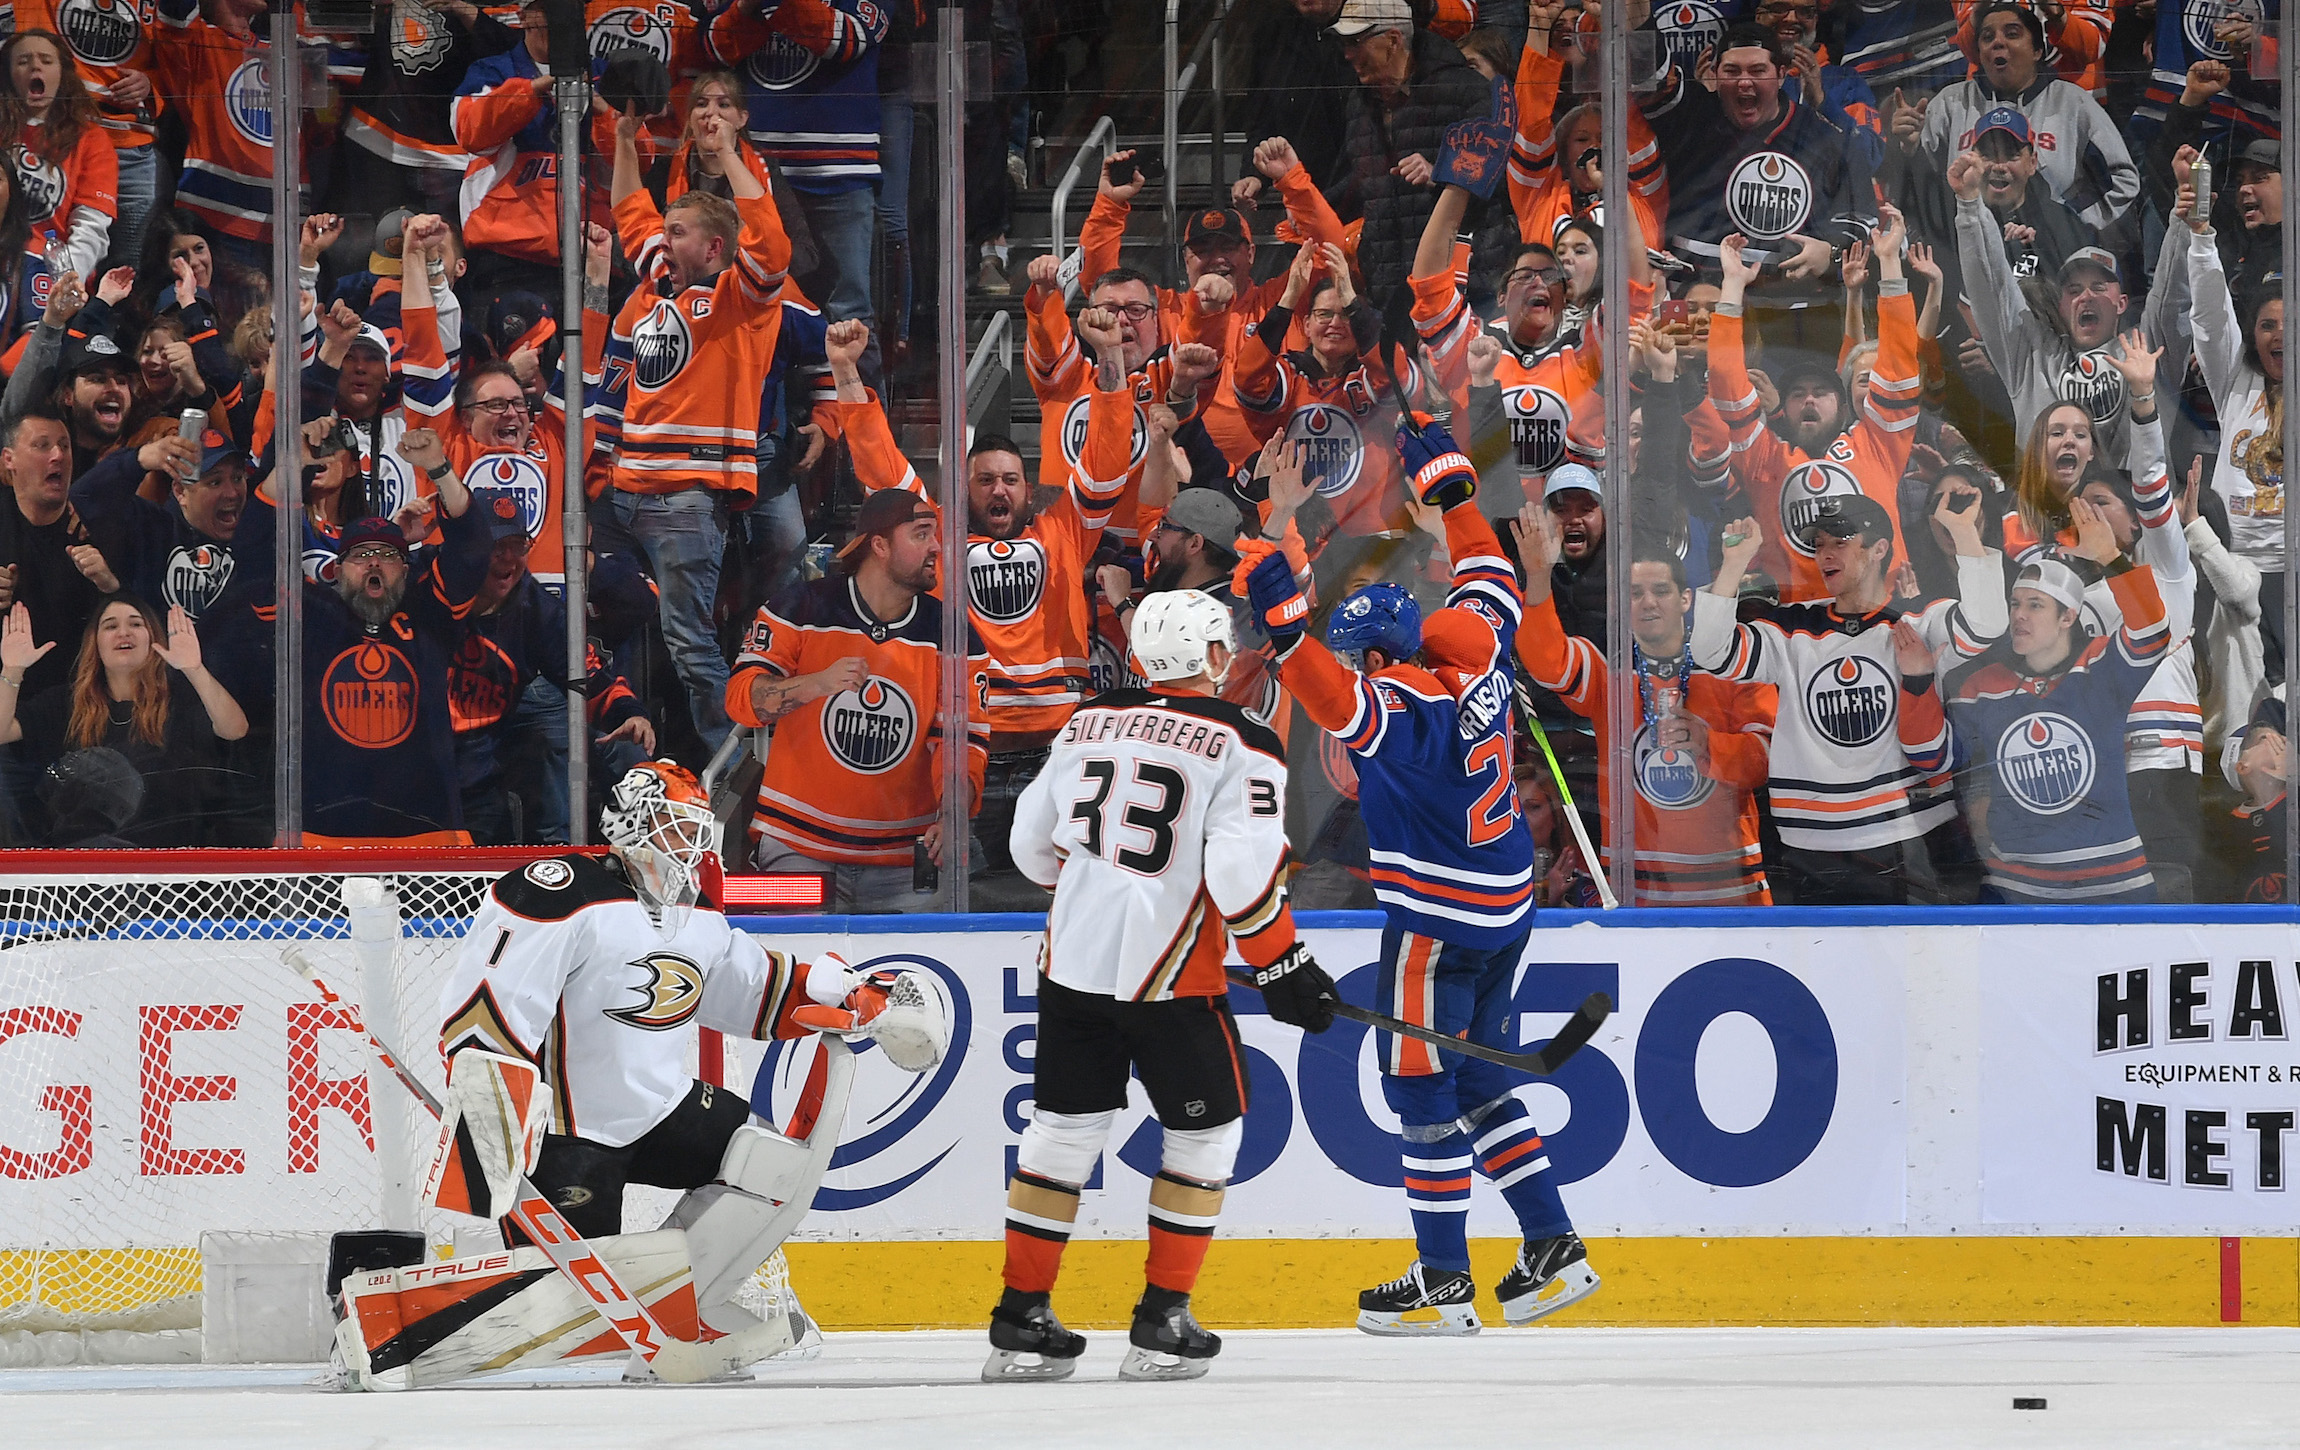 EDMONTON, CANADA - APRIL 01: Leon Draisaitl #29 of the Edmonton Oilers celebrates after scoring his third goal of the game against the Anaheim Ducks and 50th goal of the season on April 1, 2023 at Rogers Place in Edmonton, Alberta, Canada. (Photo by Andy Devlin/NHLI via Getty Images) *** Local Caption *** Leon Draisaitl;Lukas Dostal;Jakob Silfverberg